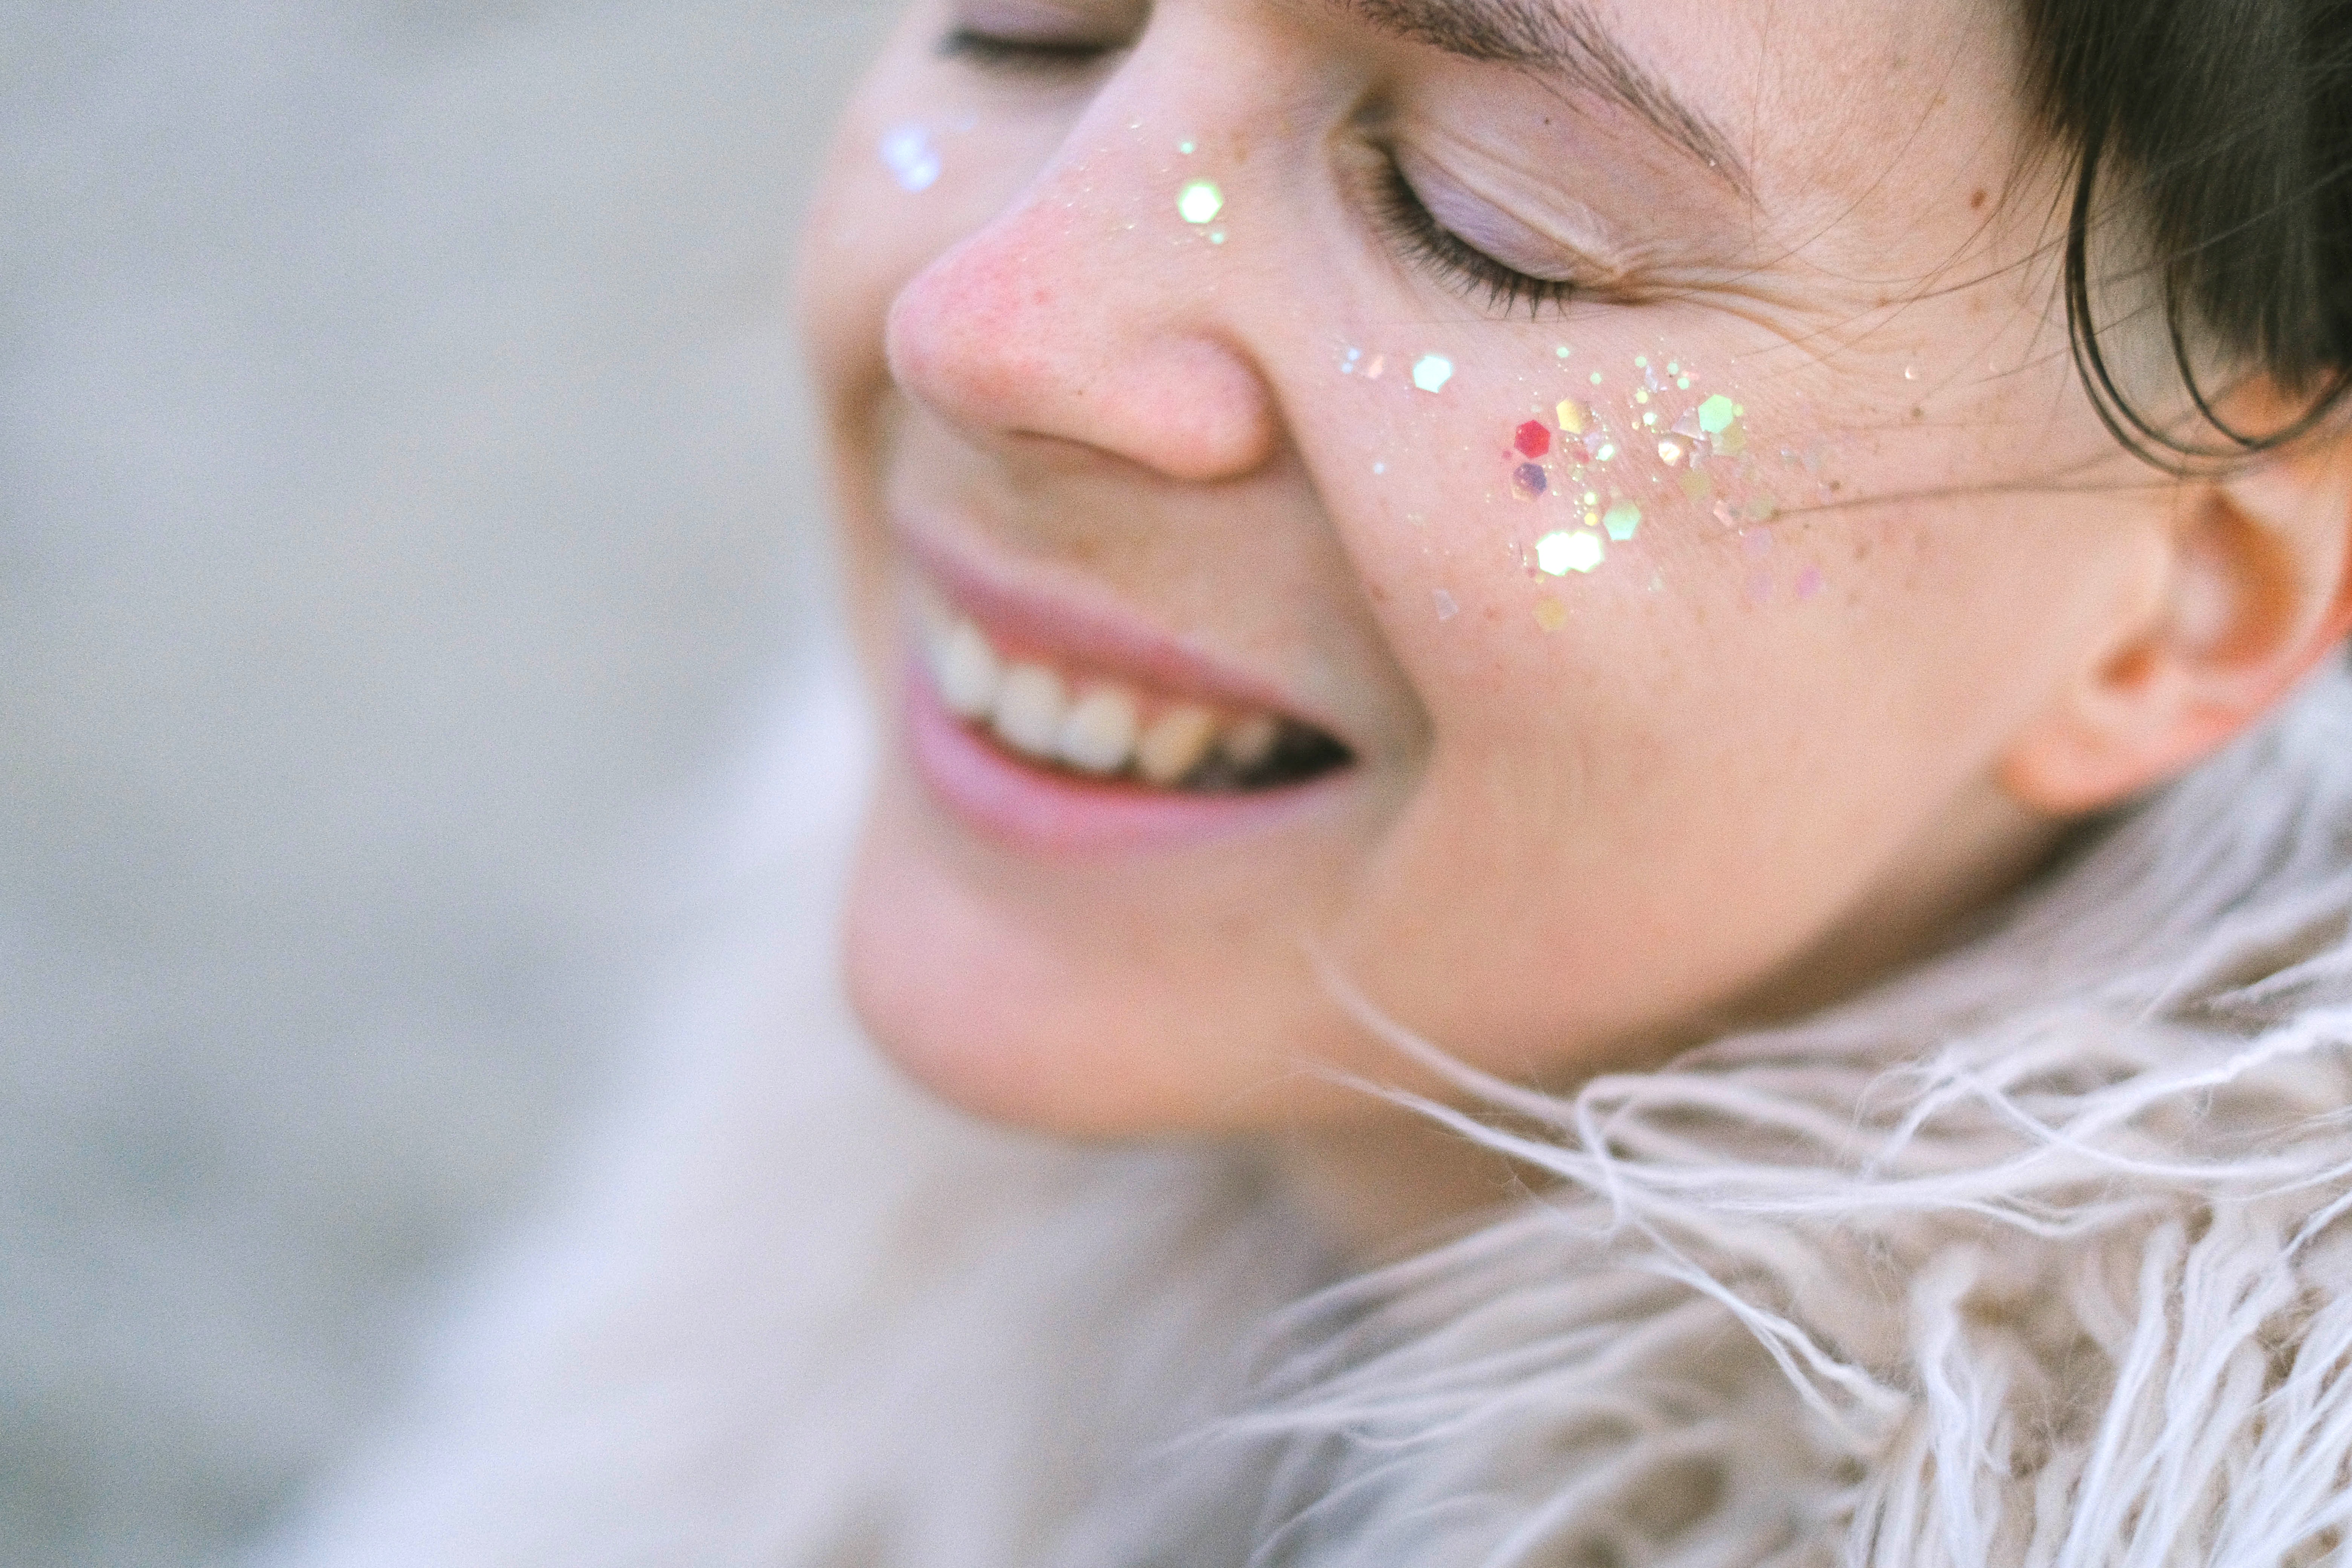 A laughing woman with glitter on her face. | Source: Pexels